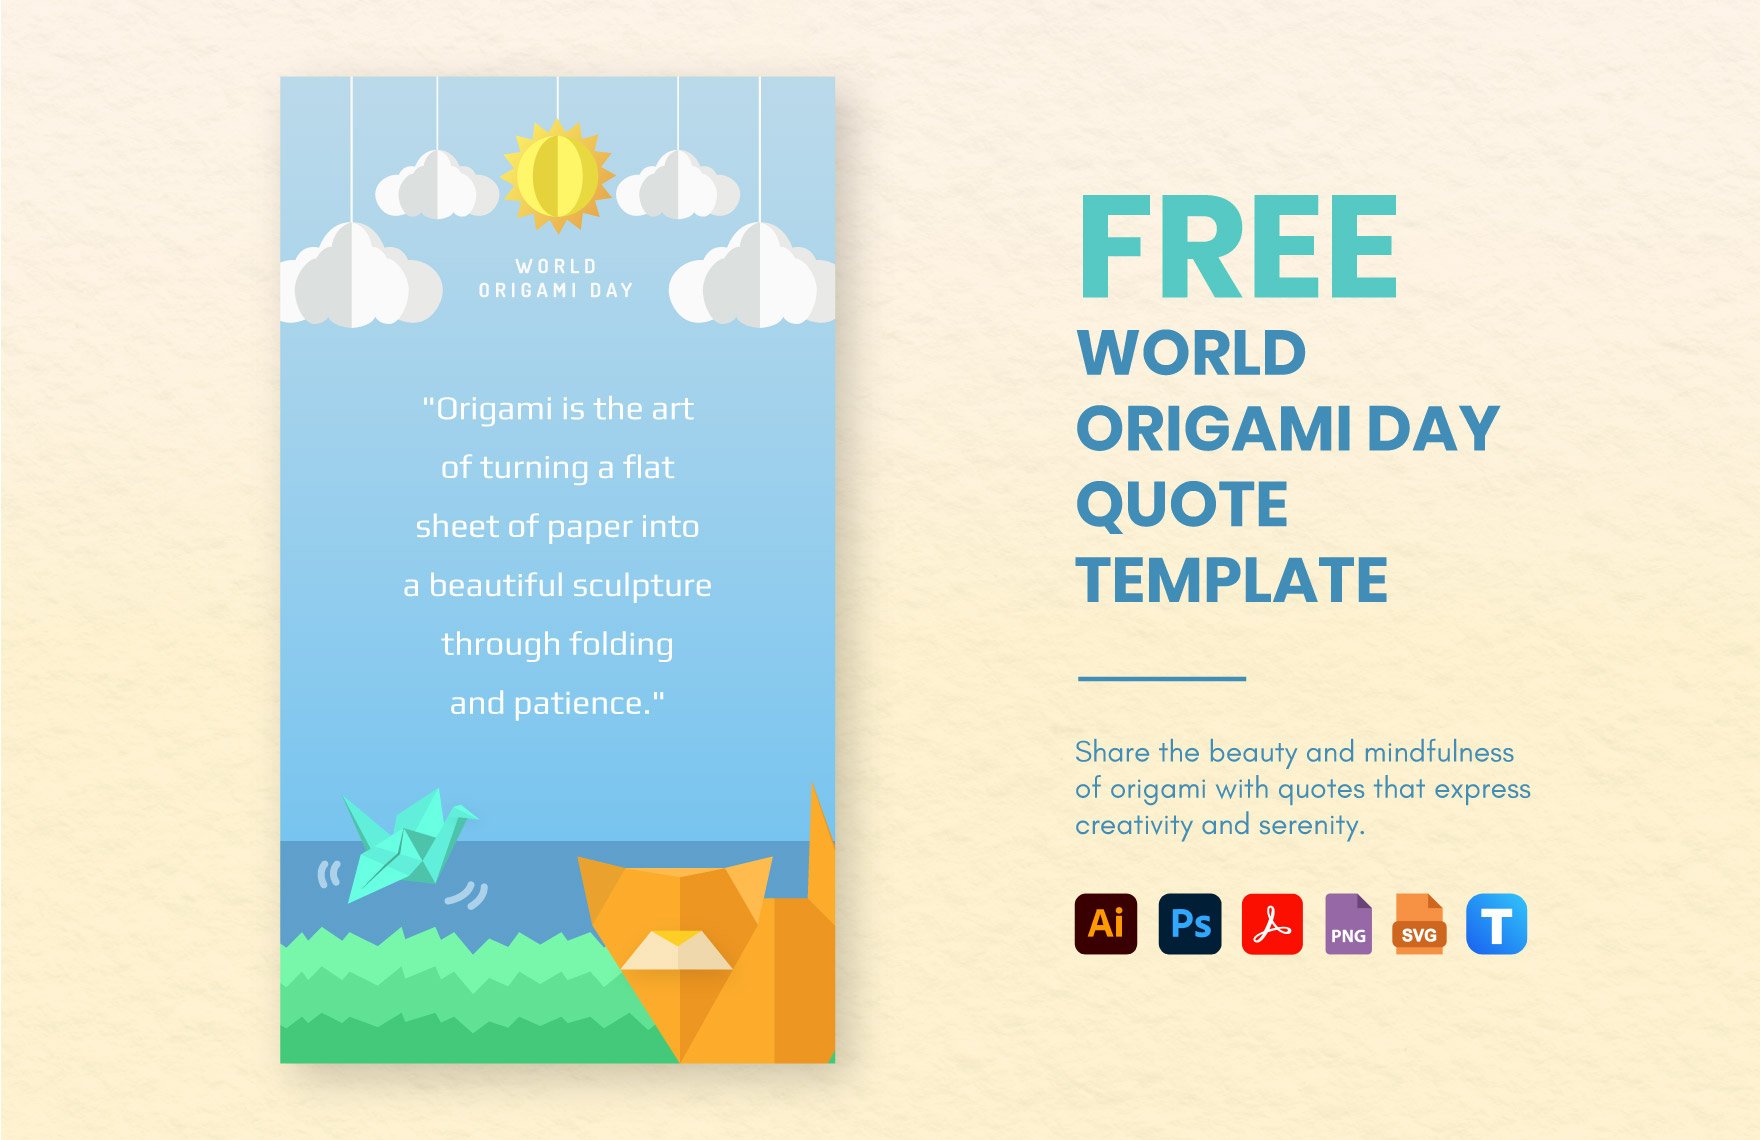 Free World Origami Day Quote in PDF, Illustrator, PSD, SVG, PNG